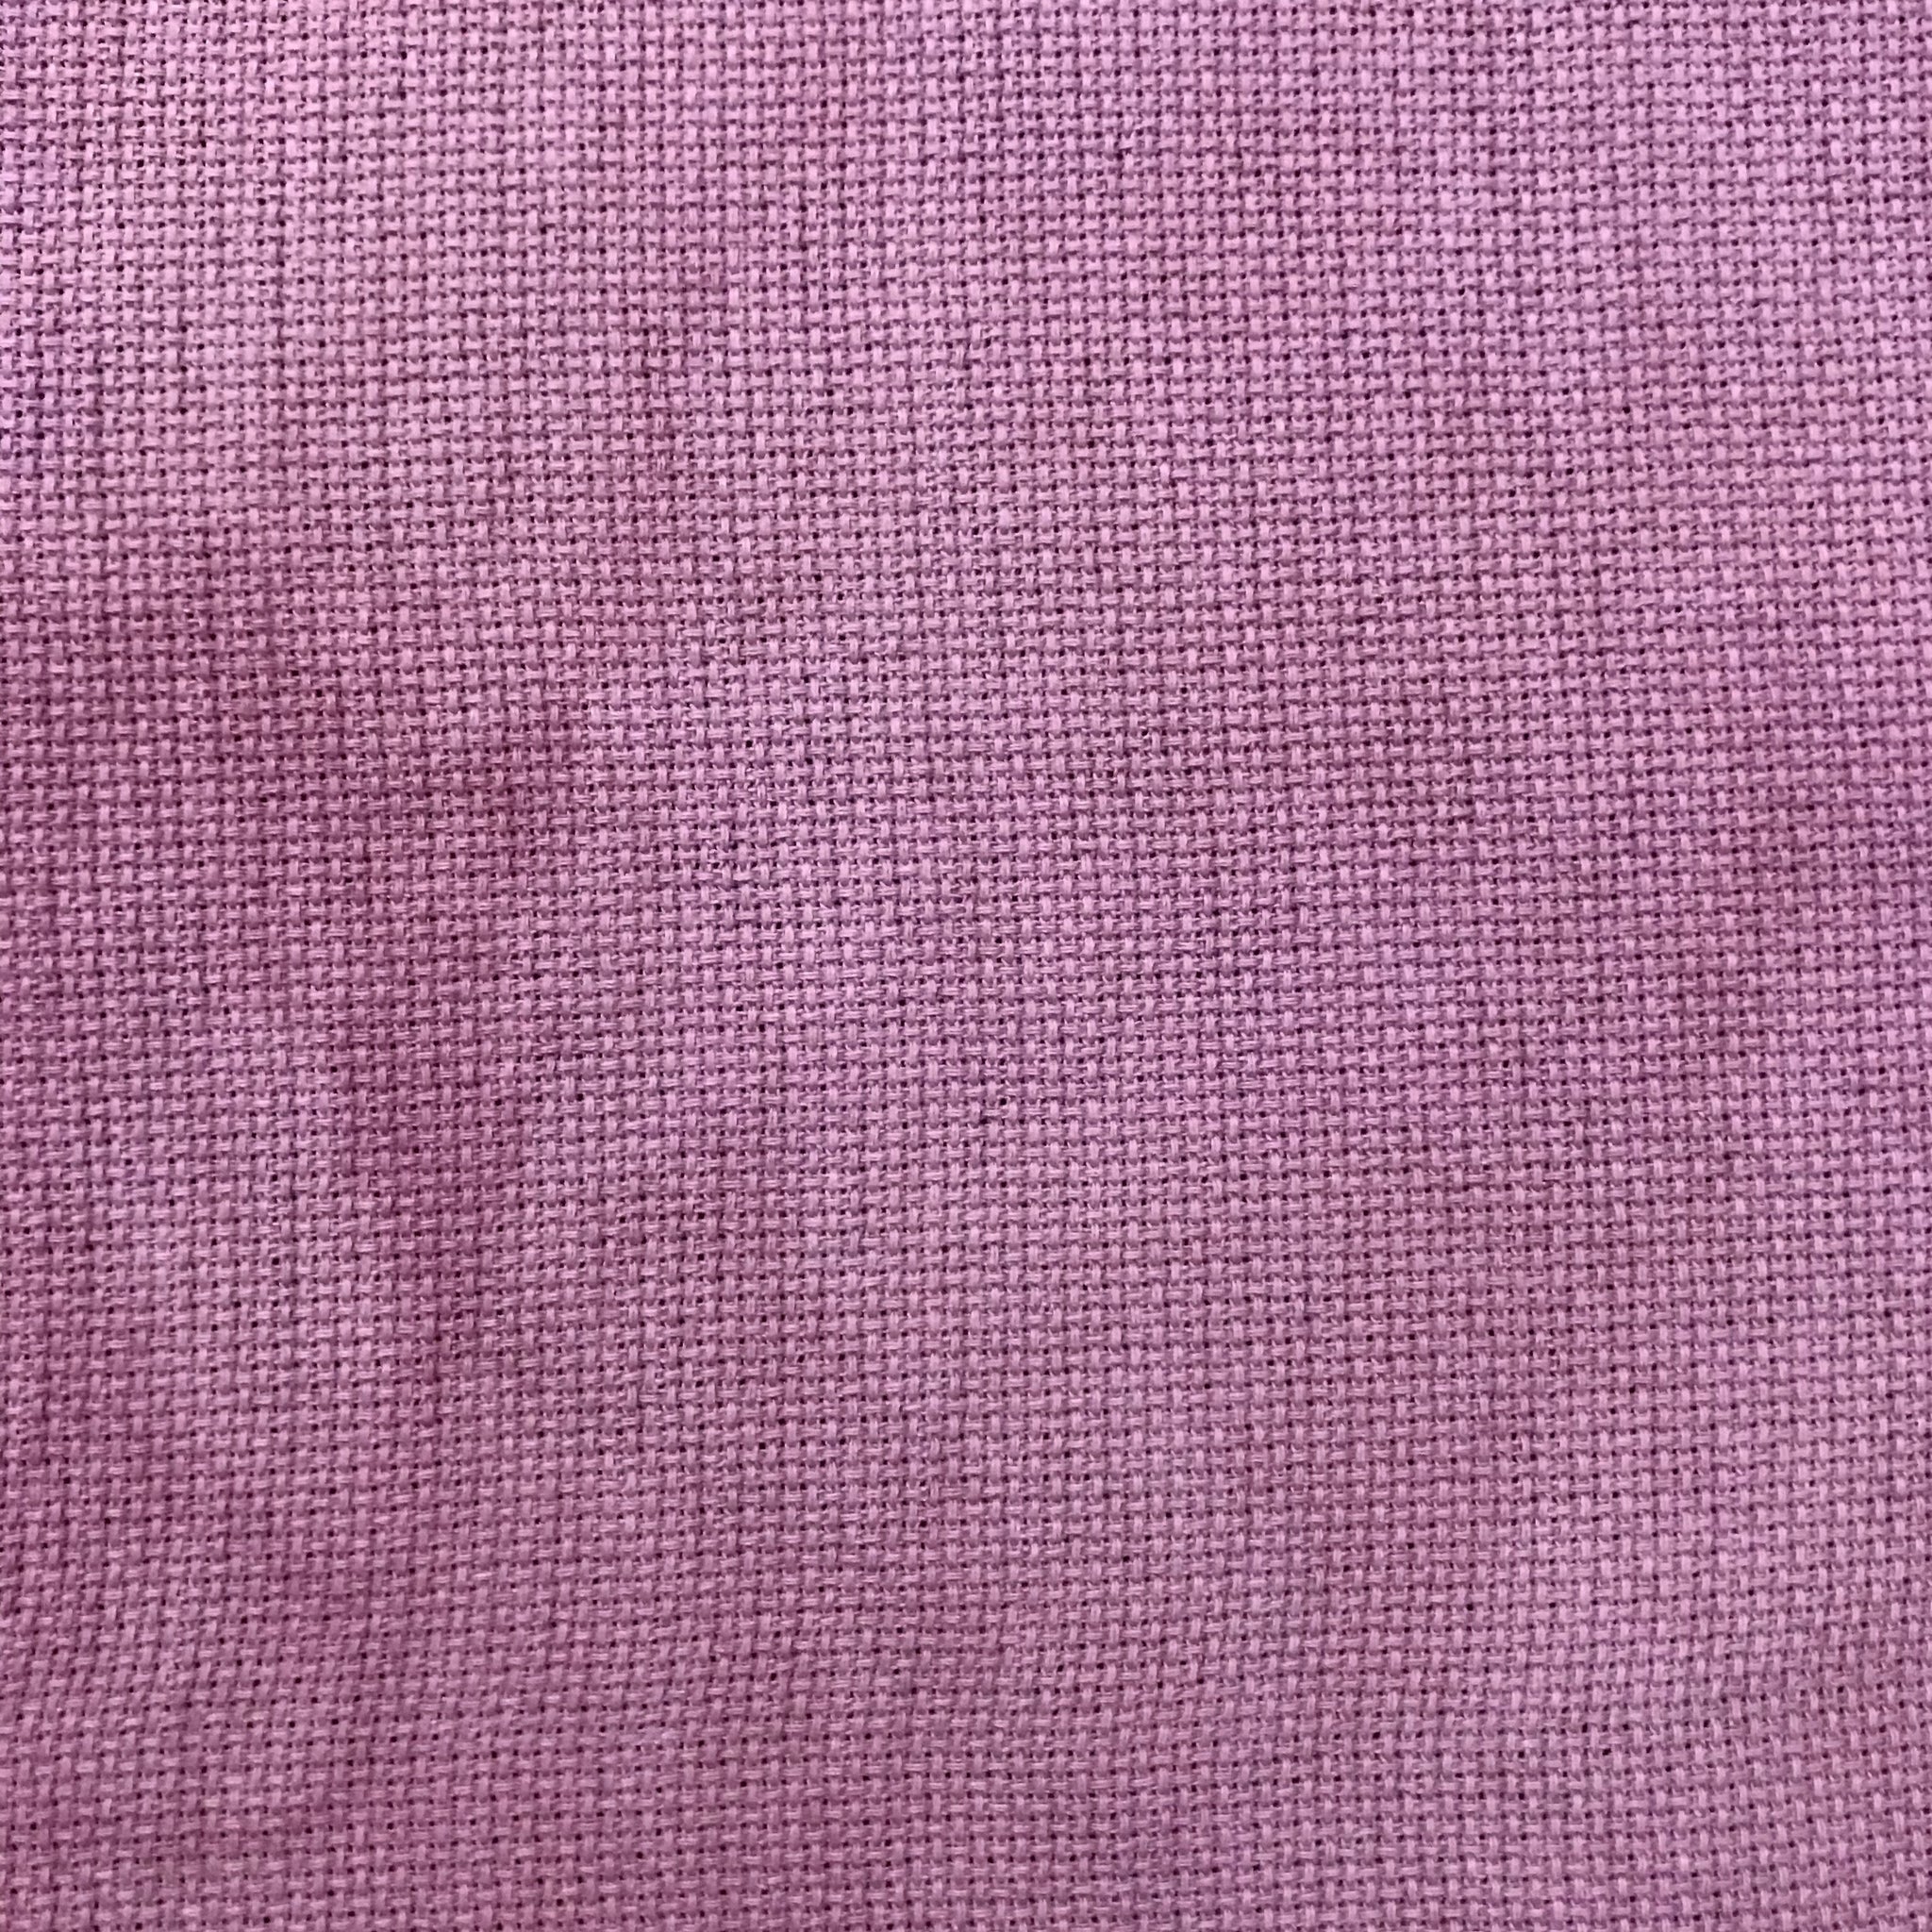 Raspberry Pie - Hand Dyed Aida - 14 Count (Discontinued)